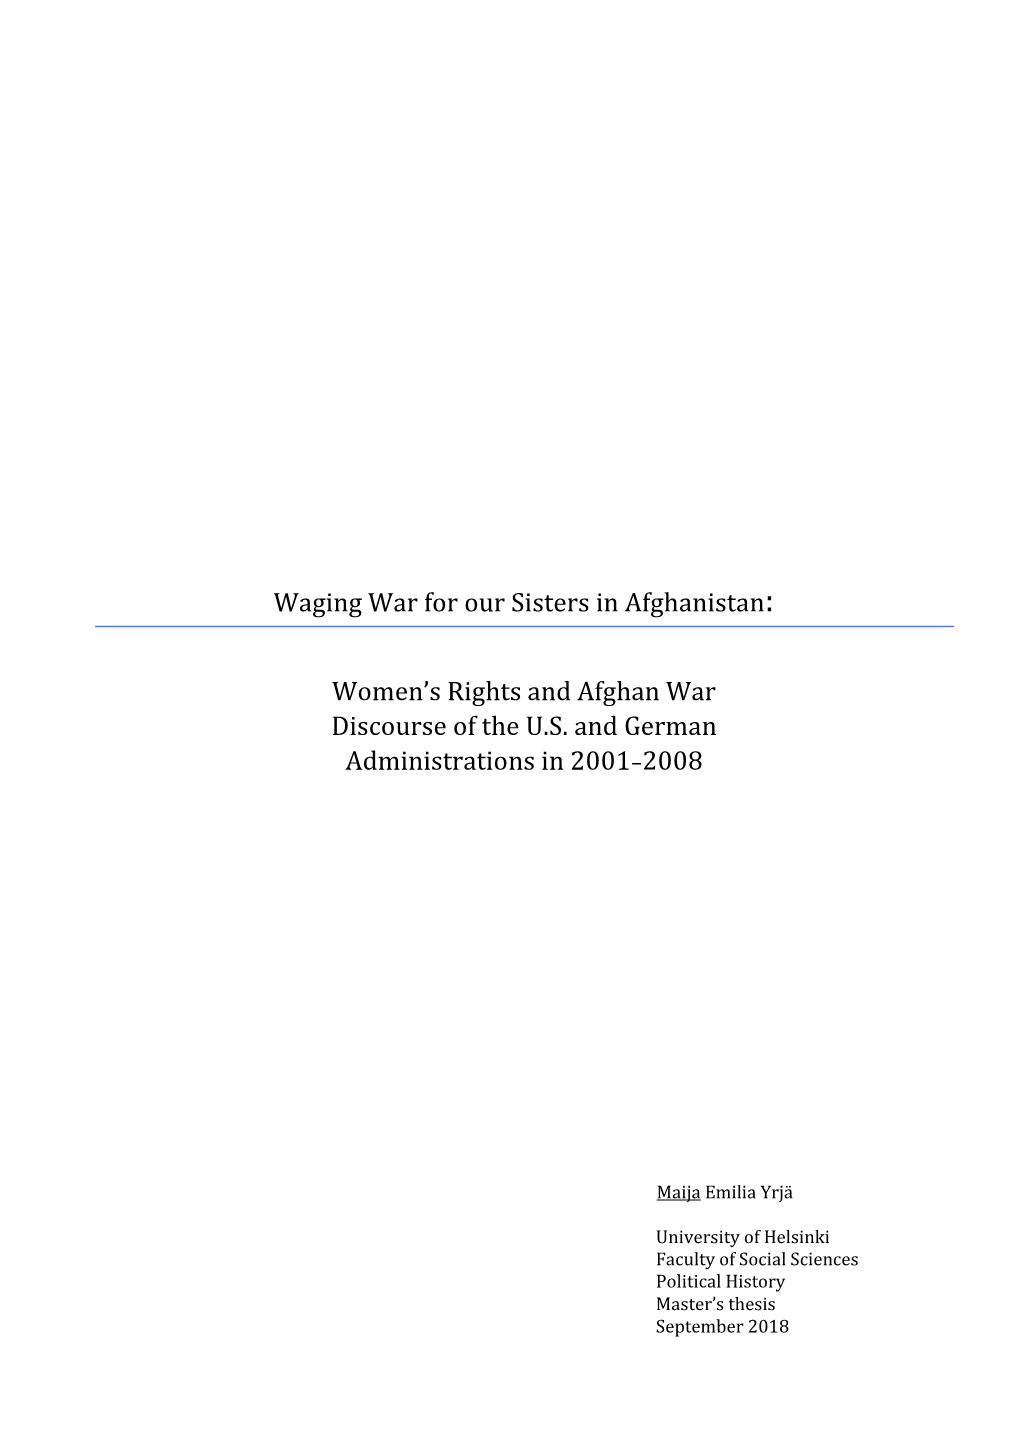 Women's Rights and Afghan War Discourse of the US and German